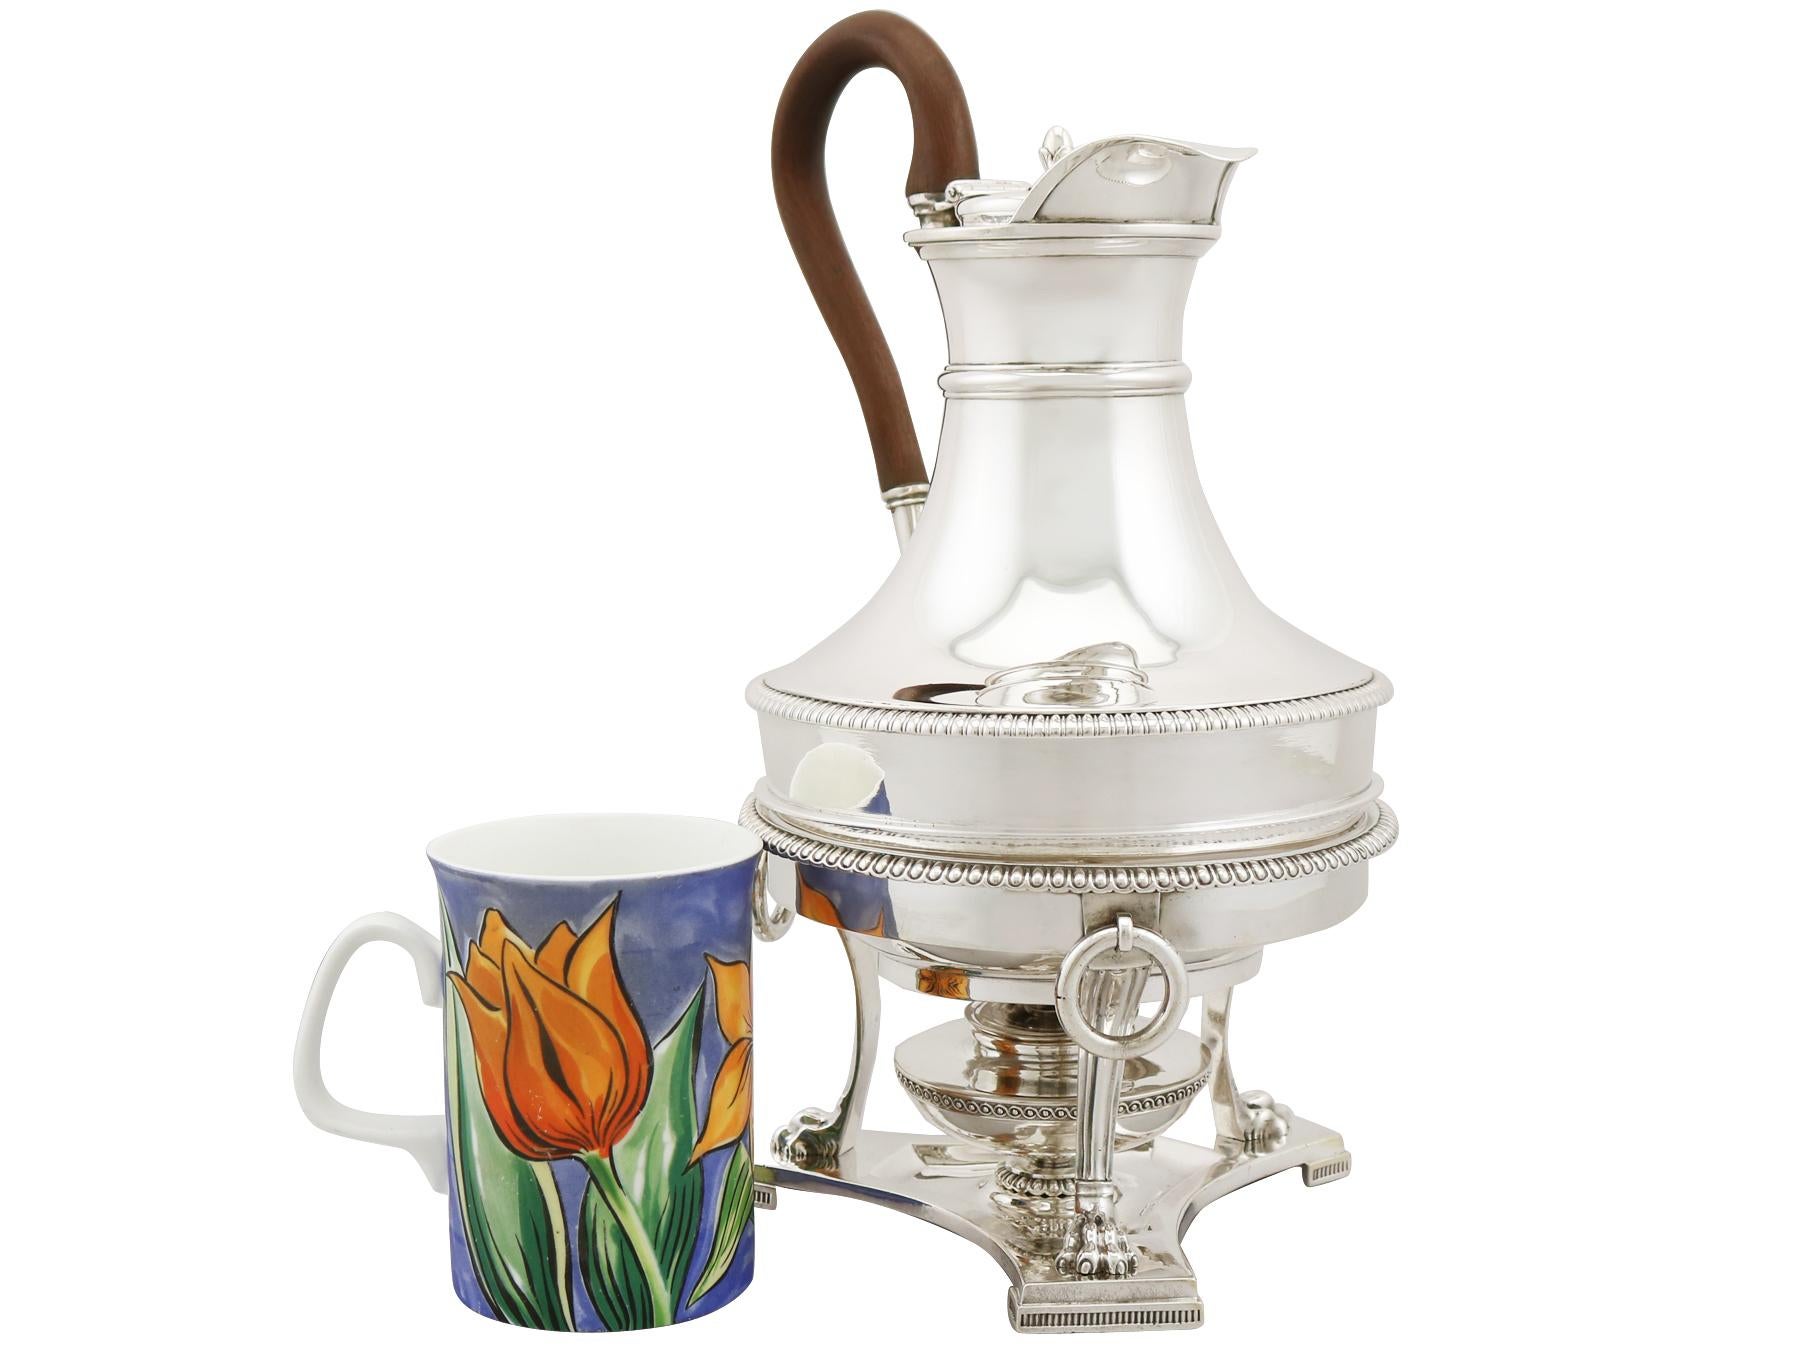 An exceptional, fine and impressive antique George III English sterling silver coffee jug with spirit burner made by Paul Storr; an addition to our Georgian silver teaware collection.

This exceptional antique George III English sterling silver